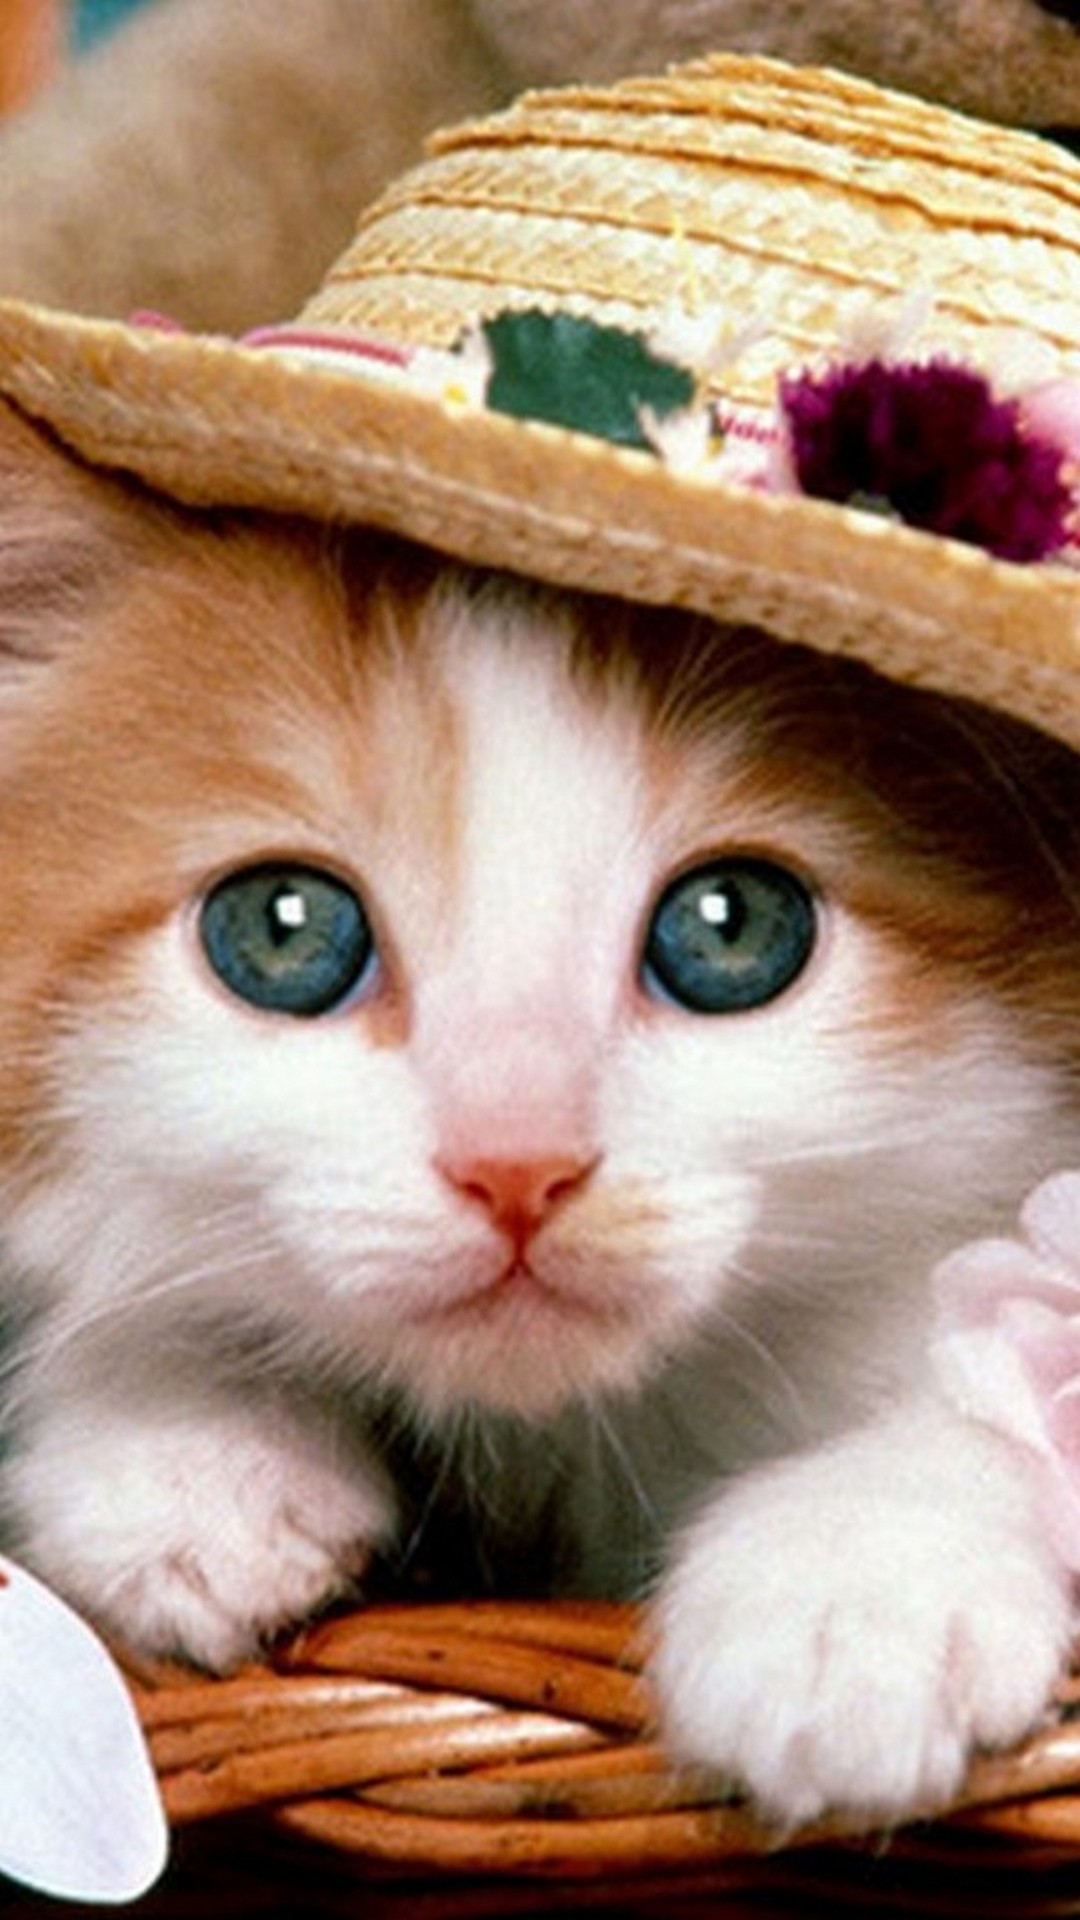 Cute Cat Hat Wallpaper For iPhone resolution 1080x1920